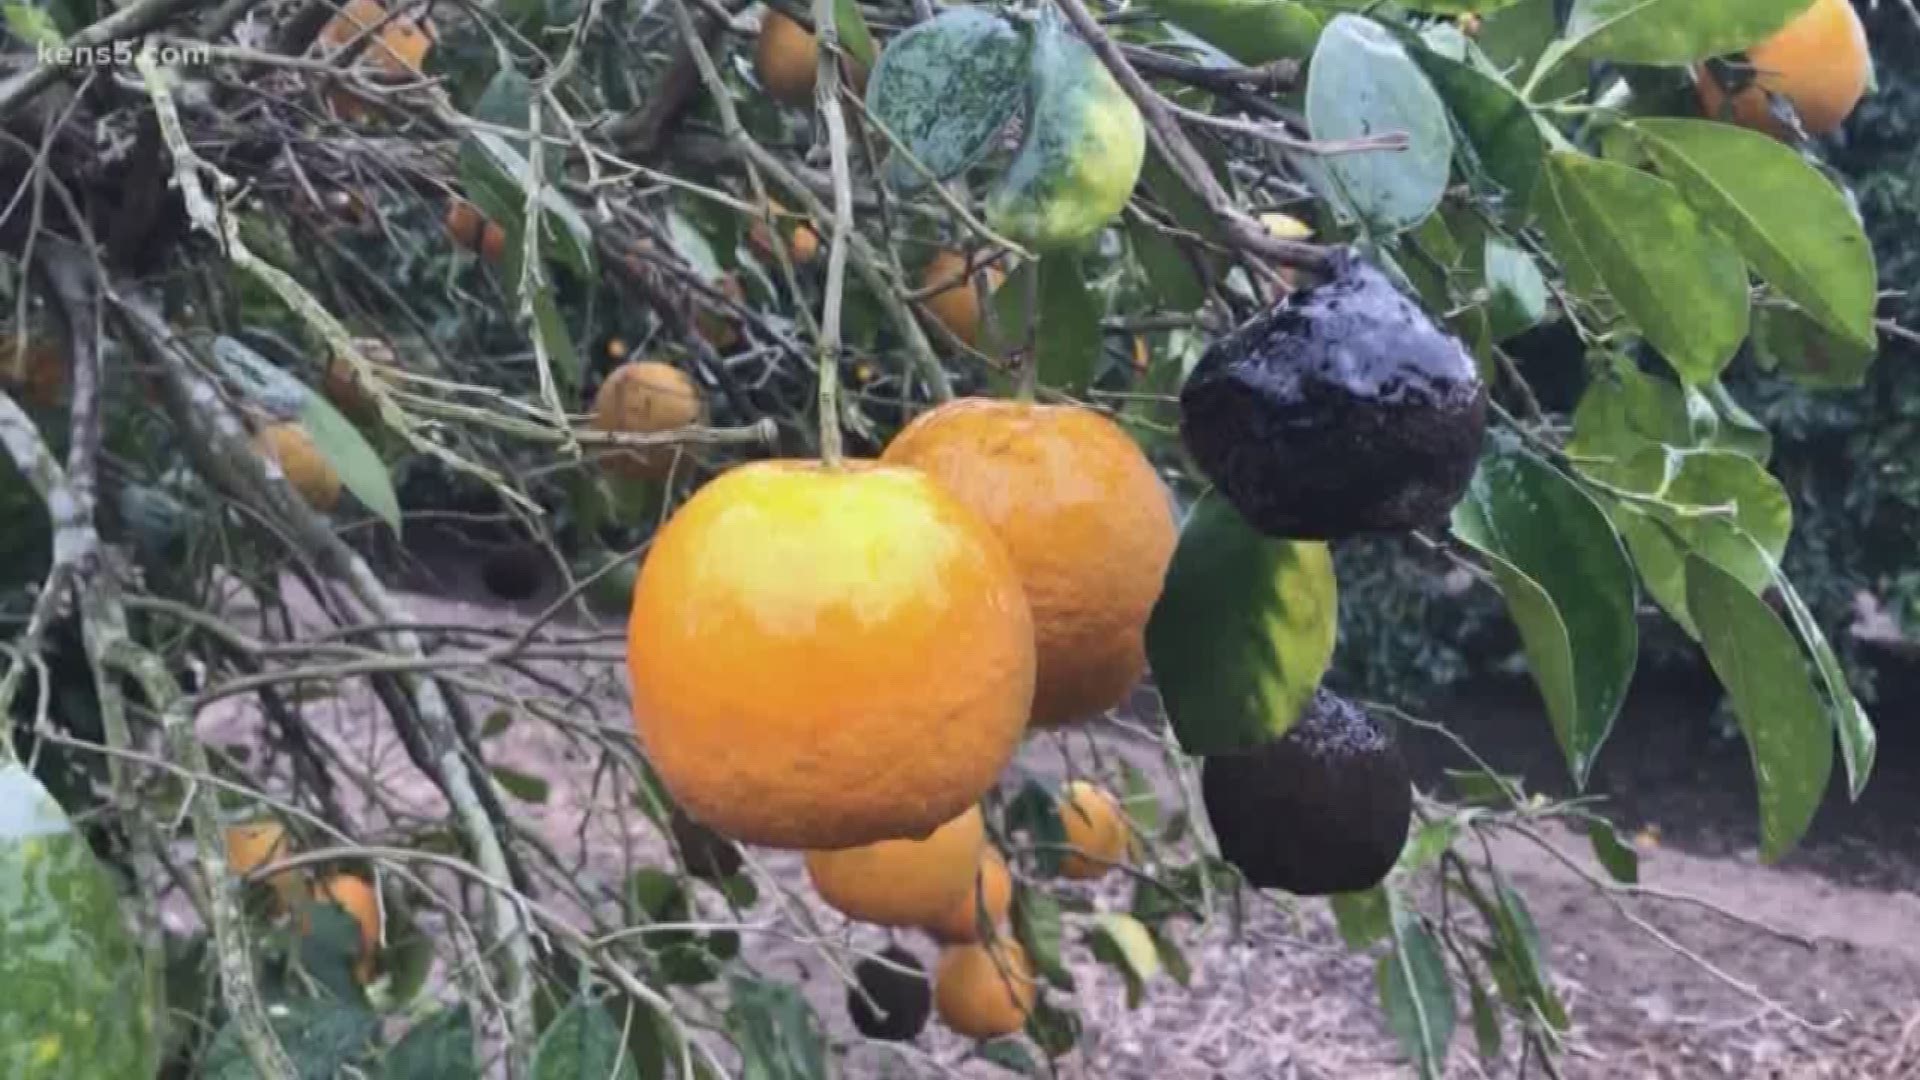 Citrus freezing is "a good thing" according to one South Texas grower as cold weather hits the area.